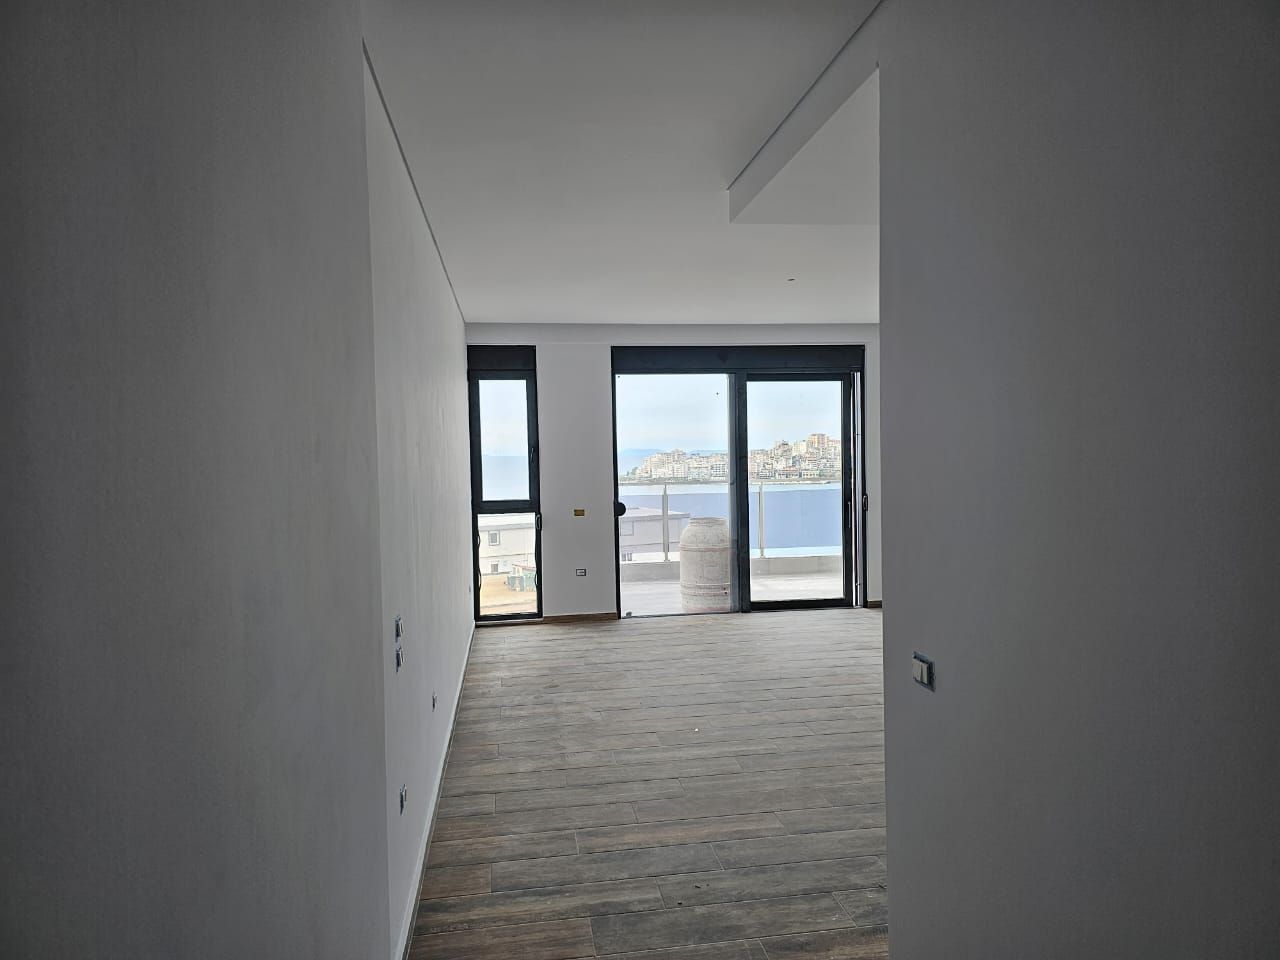 Sea View Apartment For Sale In Saranda With A Great Quality Construction, Located Only 5 Minutes From The Beach